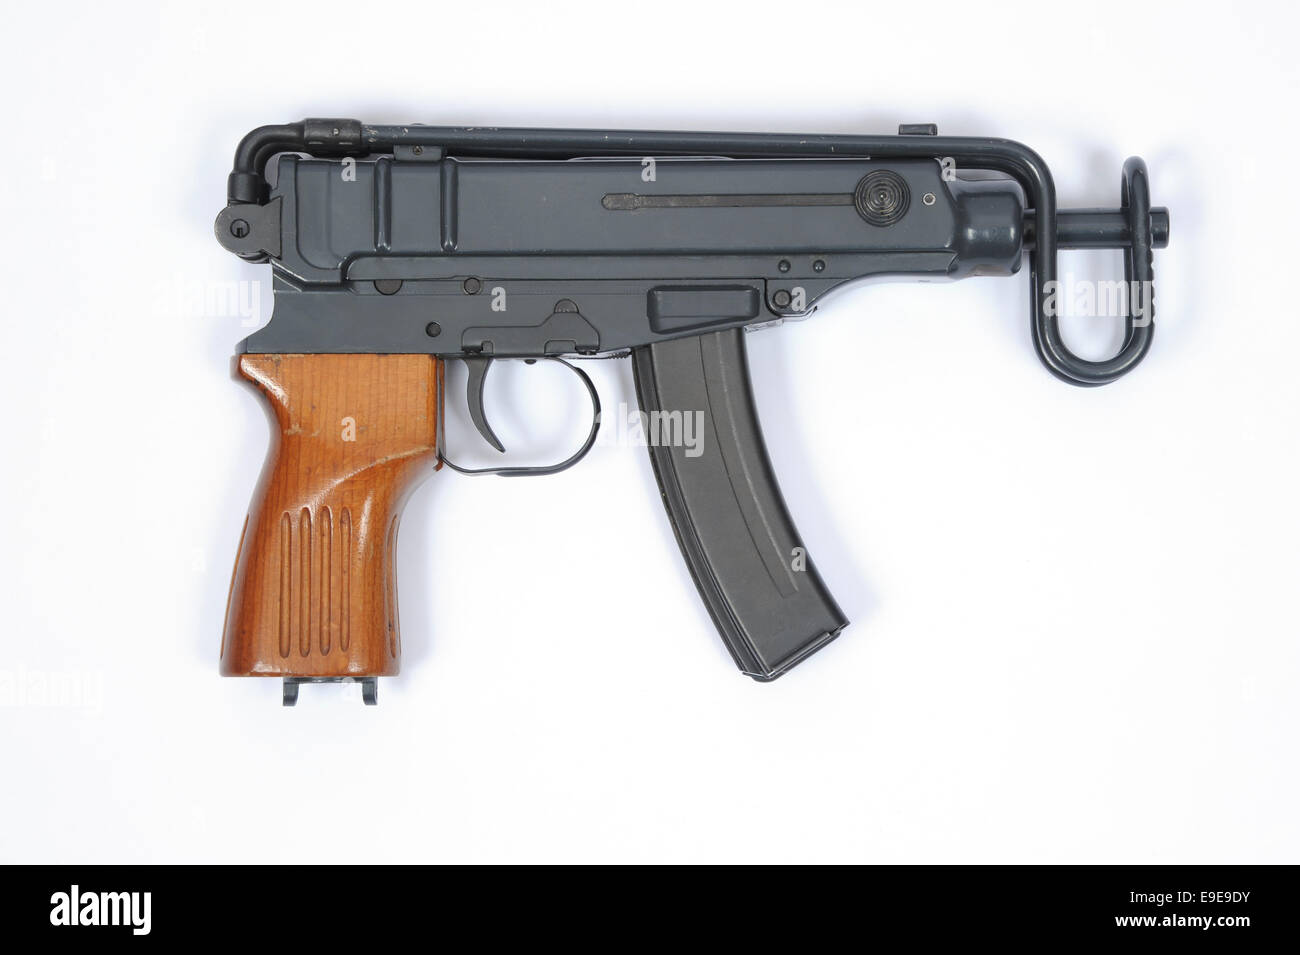 The Škorpion Vz61, A Czechoslovak 7.65 mm submachine gun with a high rate  of fire and a very compact design REAL WEAPON Stock Photo - Alamy